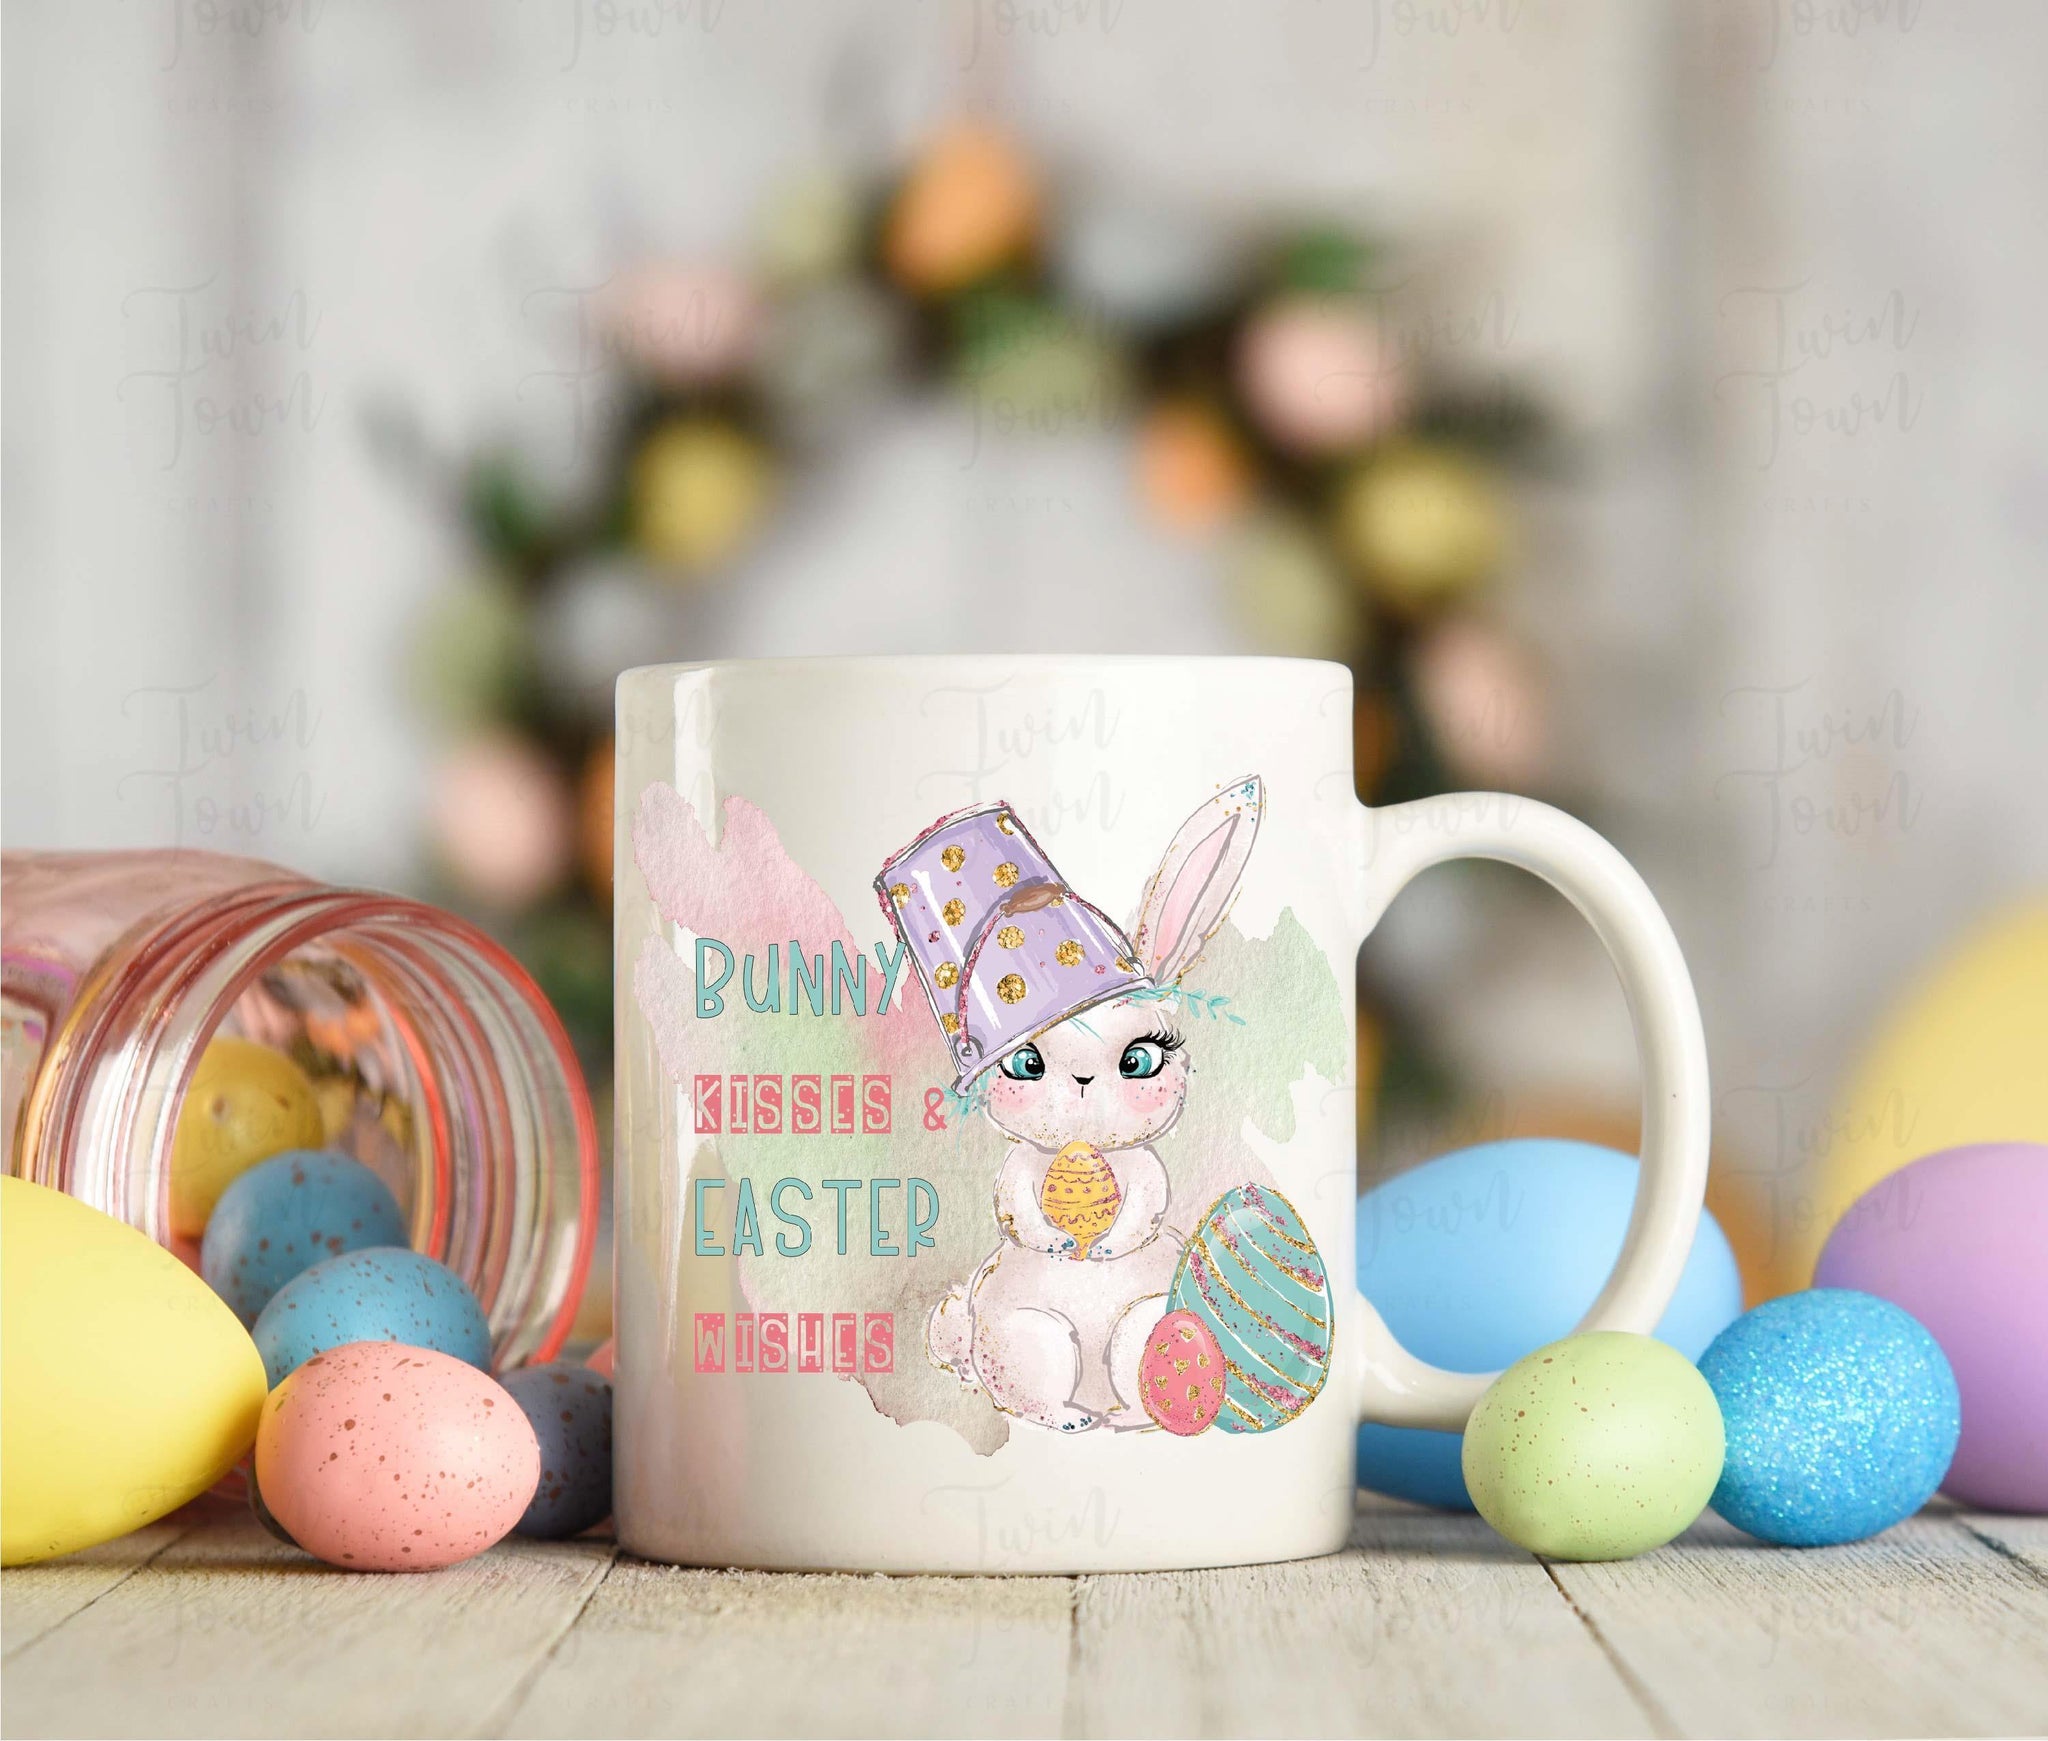 Bunny Kisses, Easter wishes mug - Twin Town Crafts